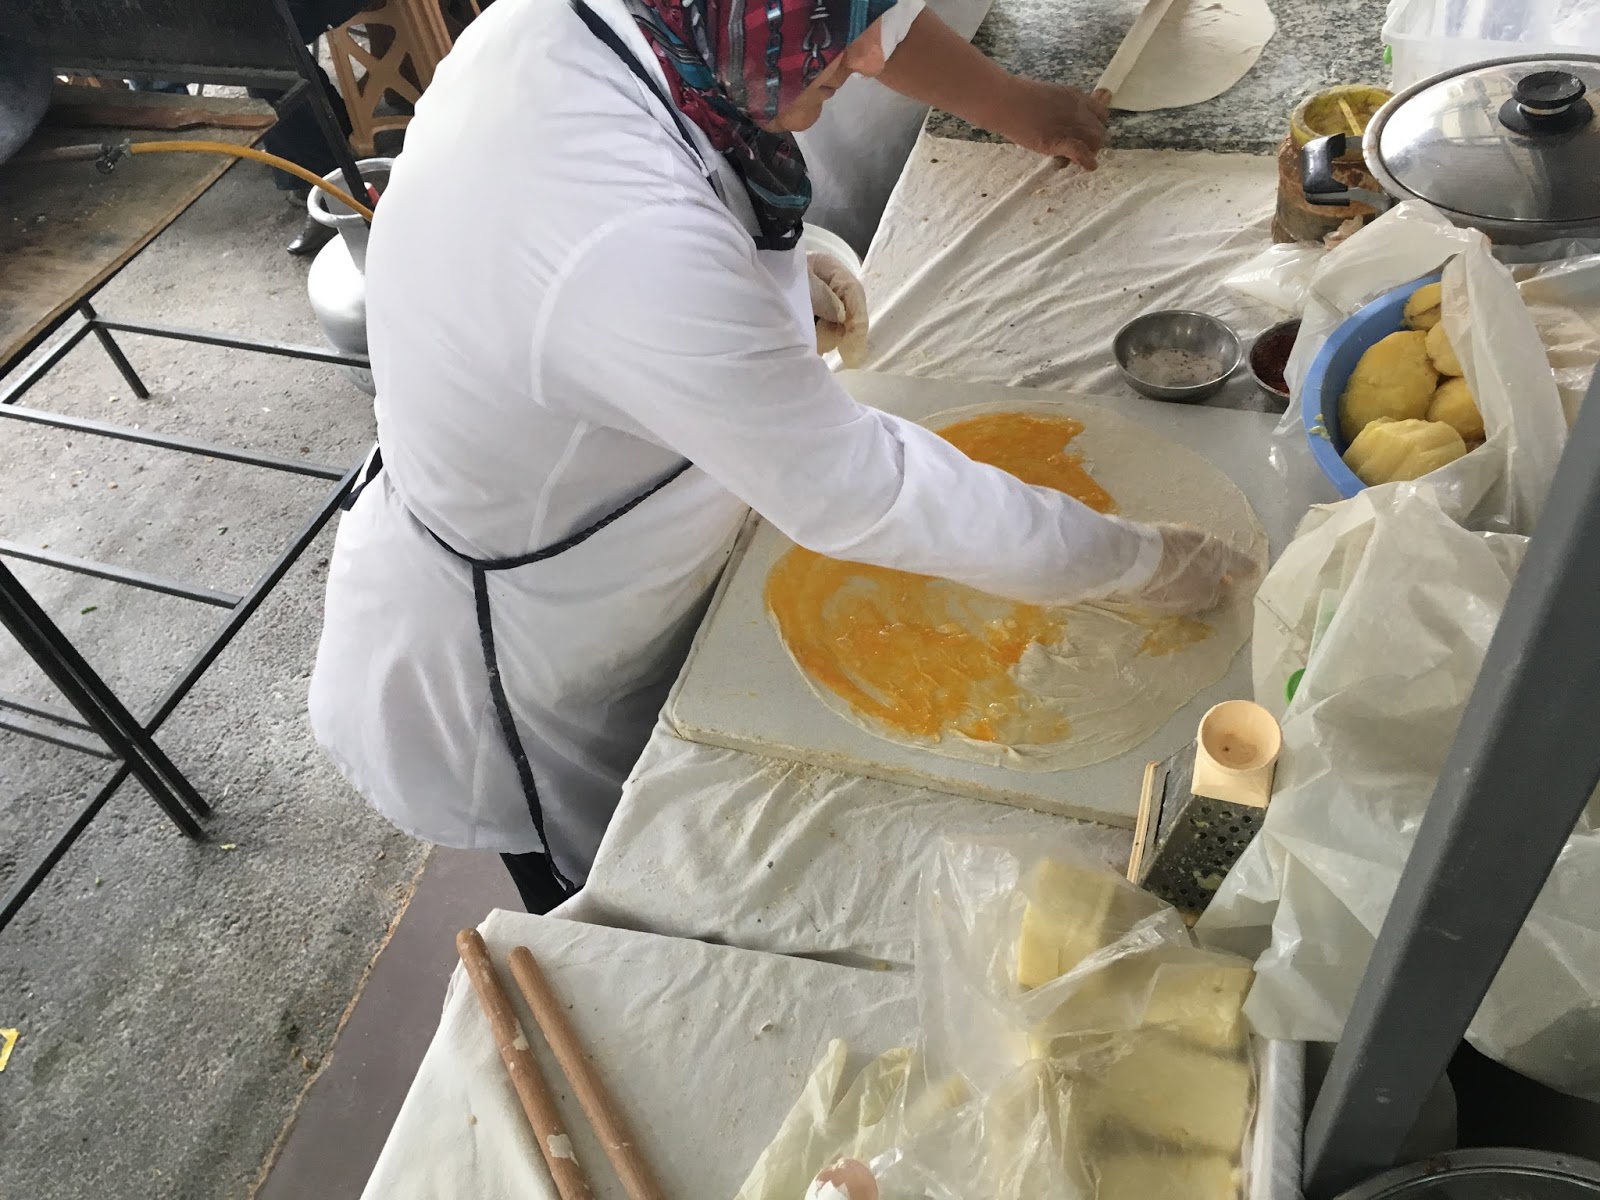 LeeZe visits Izmir Sunday farmer’s market. The lady is making my breakfast using two eggs and some white melting cheese.